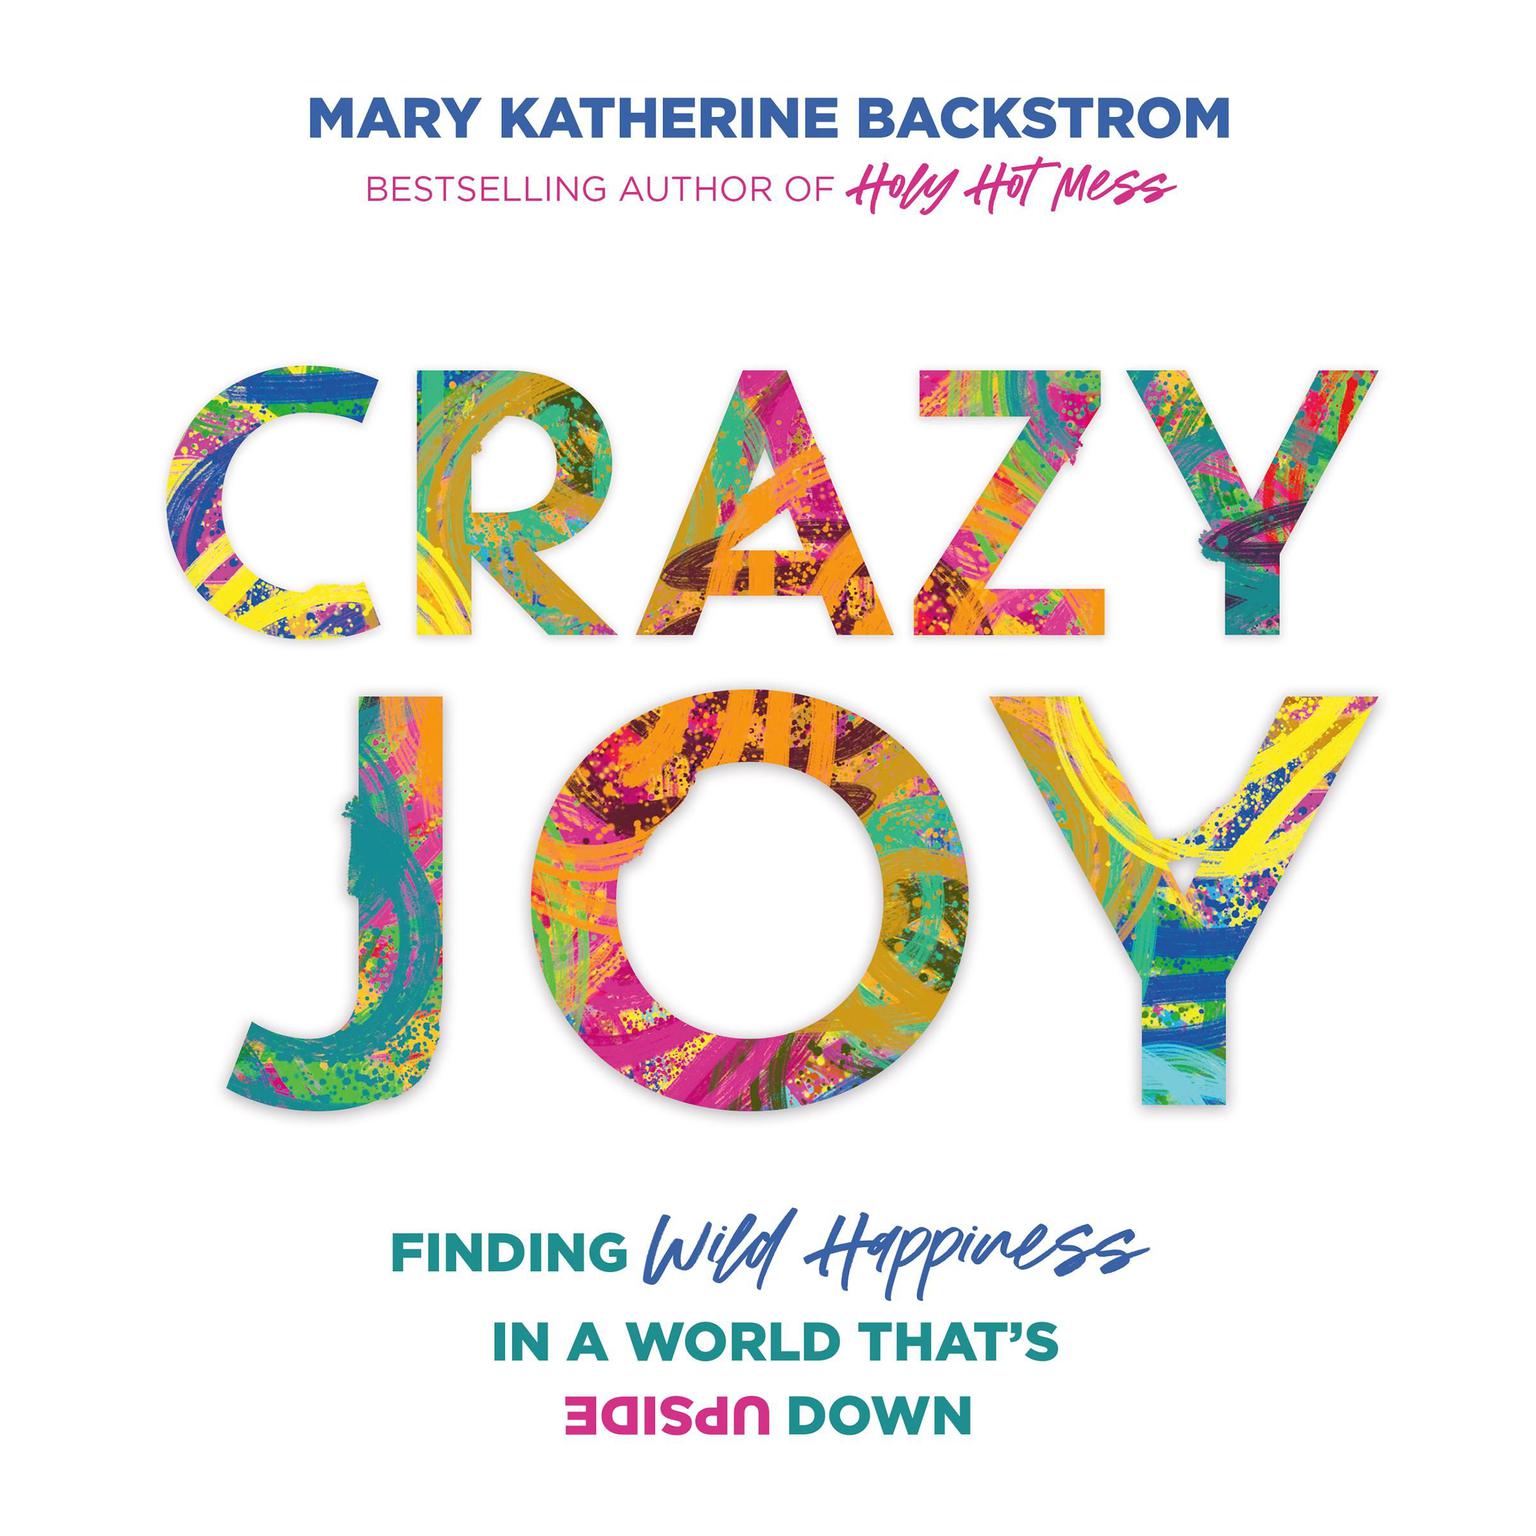 Crazy Joy: Finding Wild Happiness in a World Thats Upside Down Audiobook, by Mary Katherine Backstrom